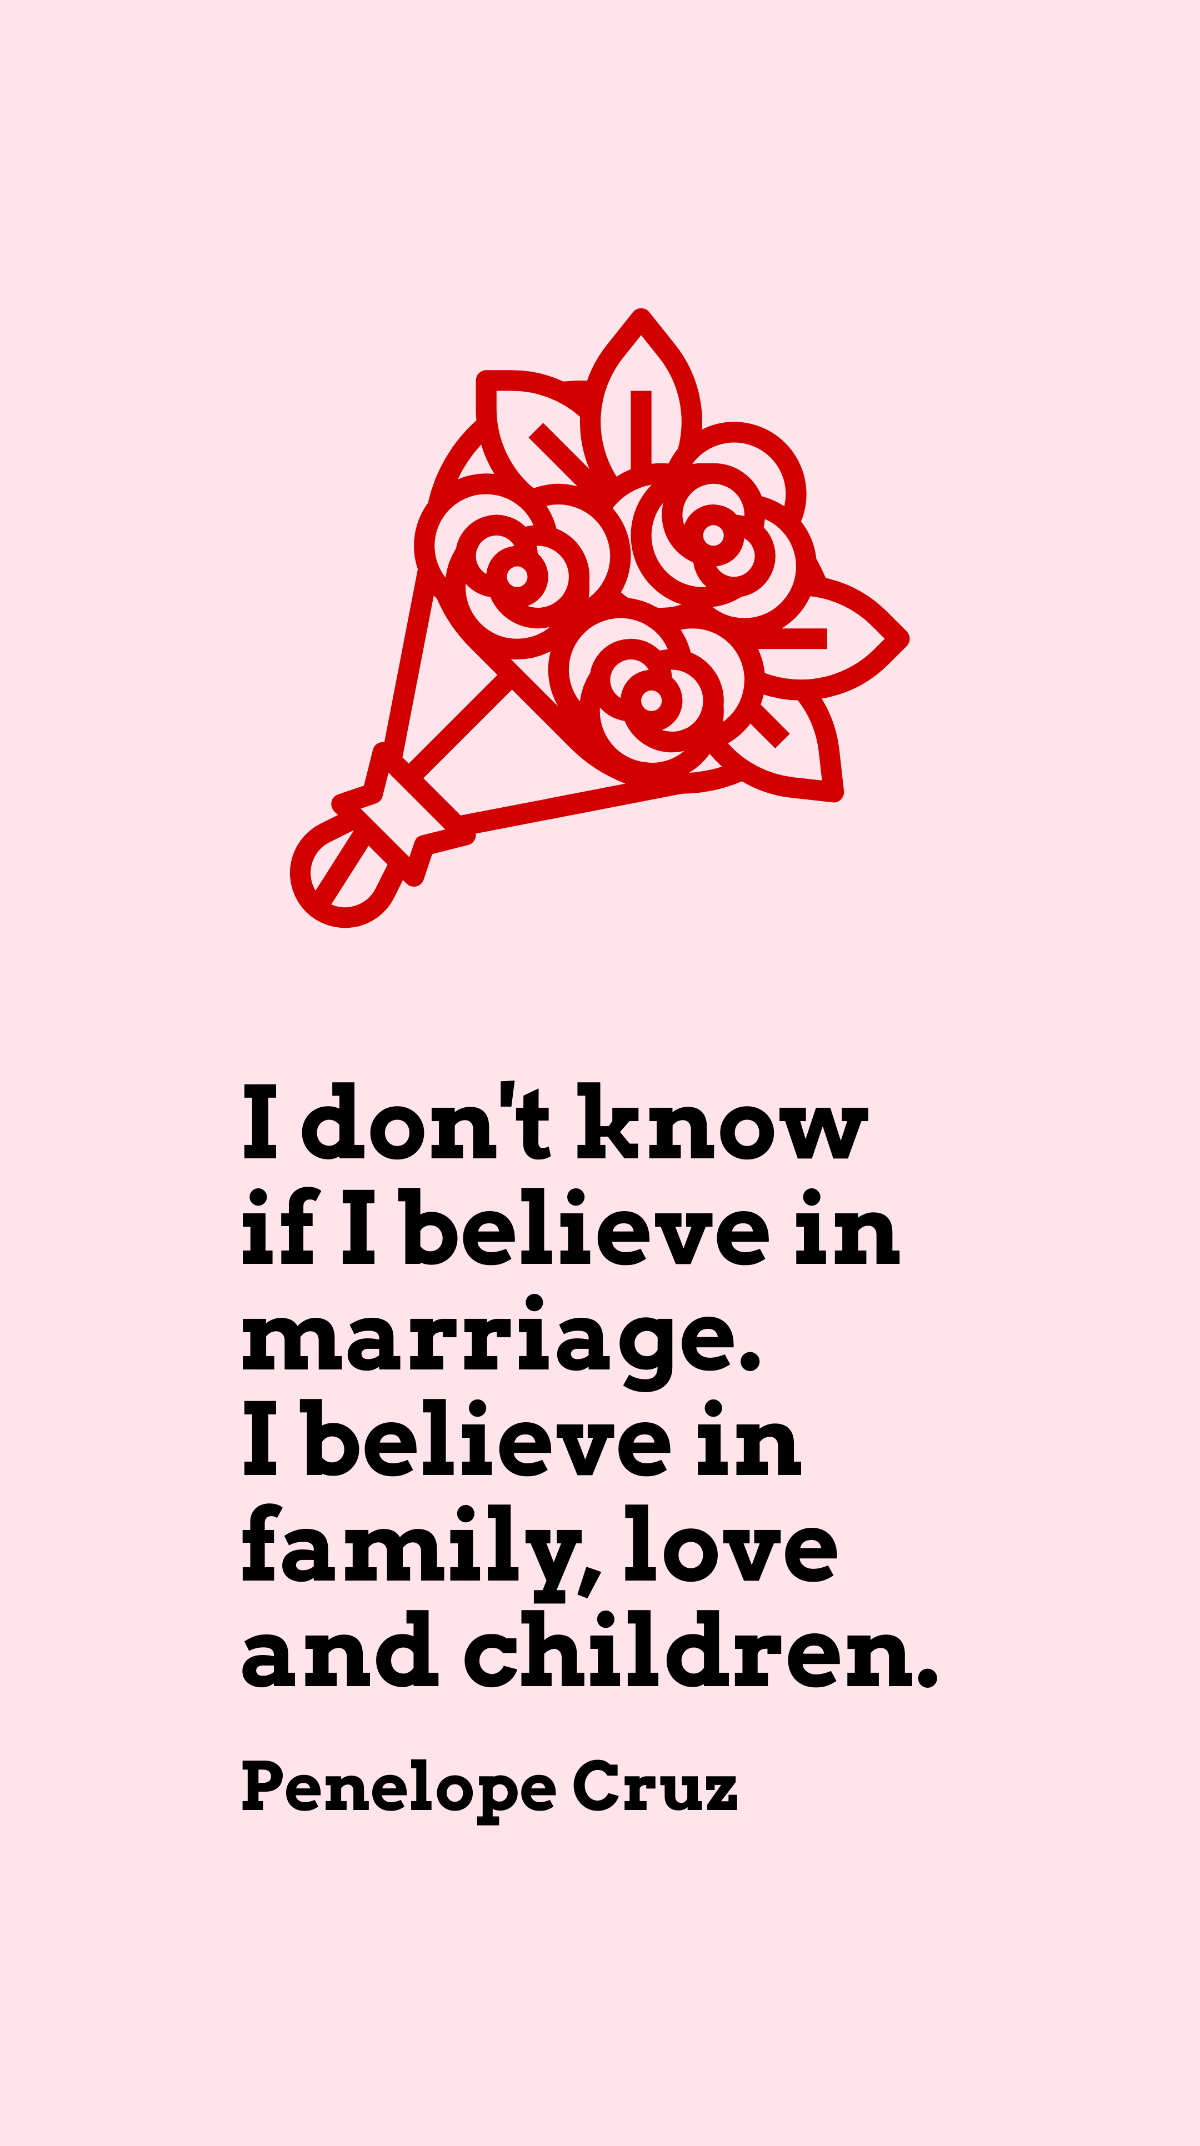 Penelope Cruz - I don't know if I believe in marriage. I believe in family, love and children. Template